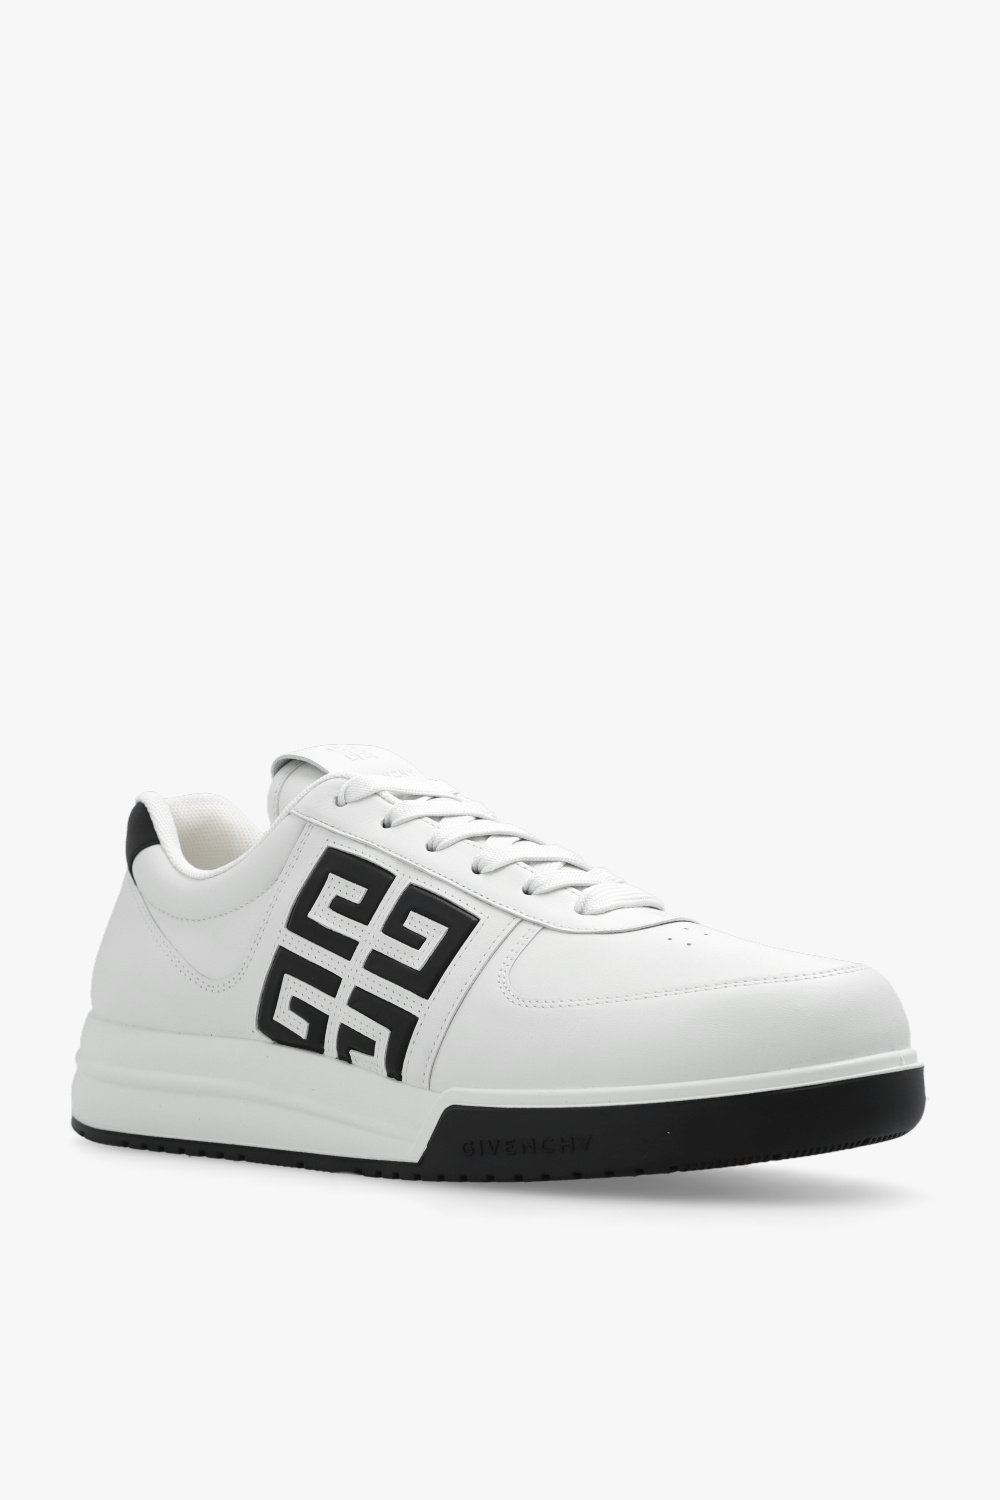 Givenchy ‘G4 Low’ sneakers